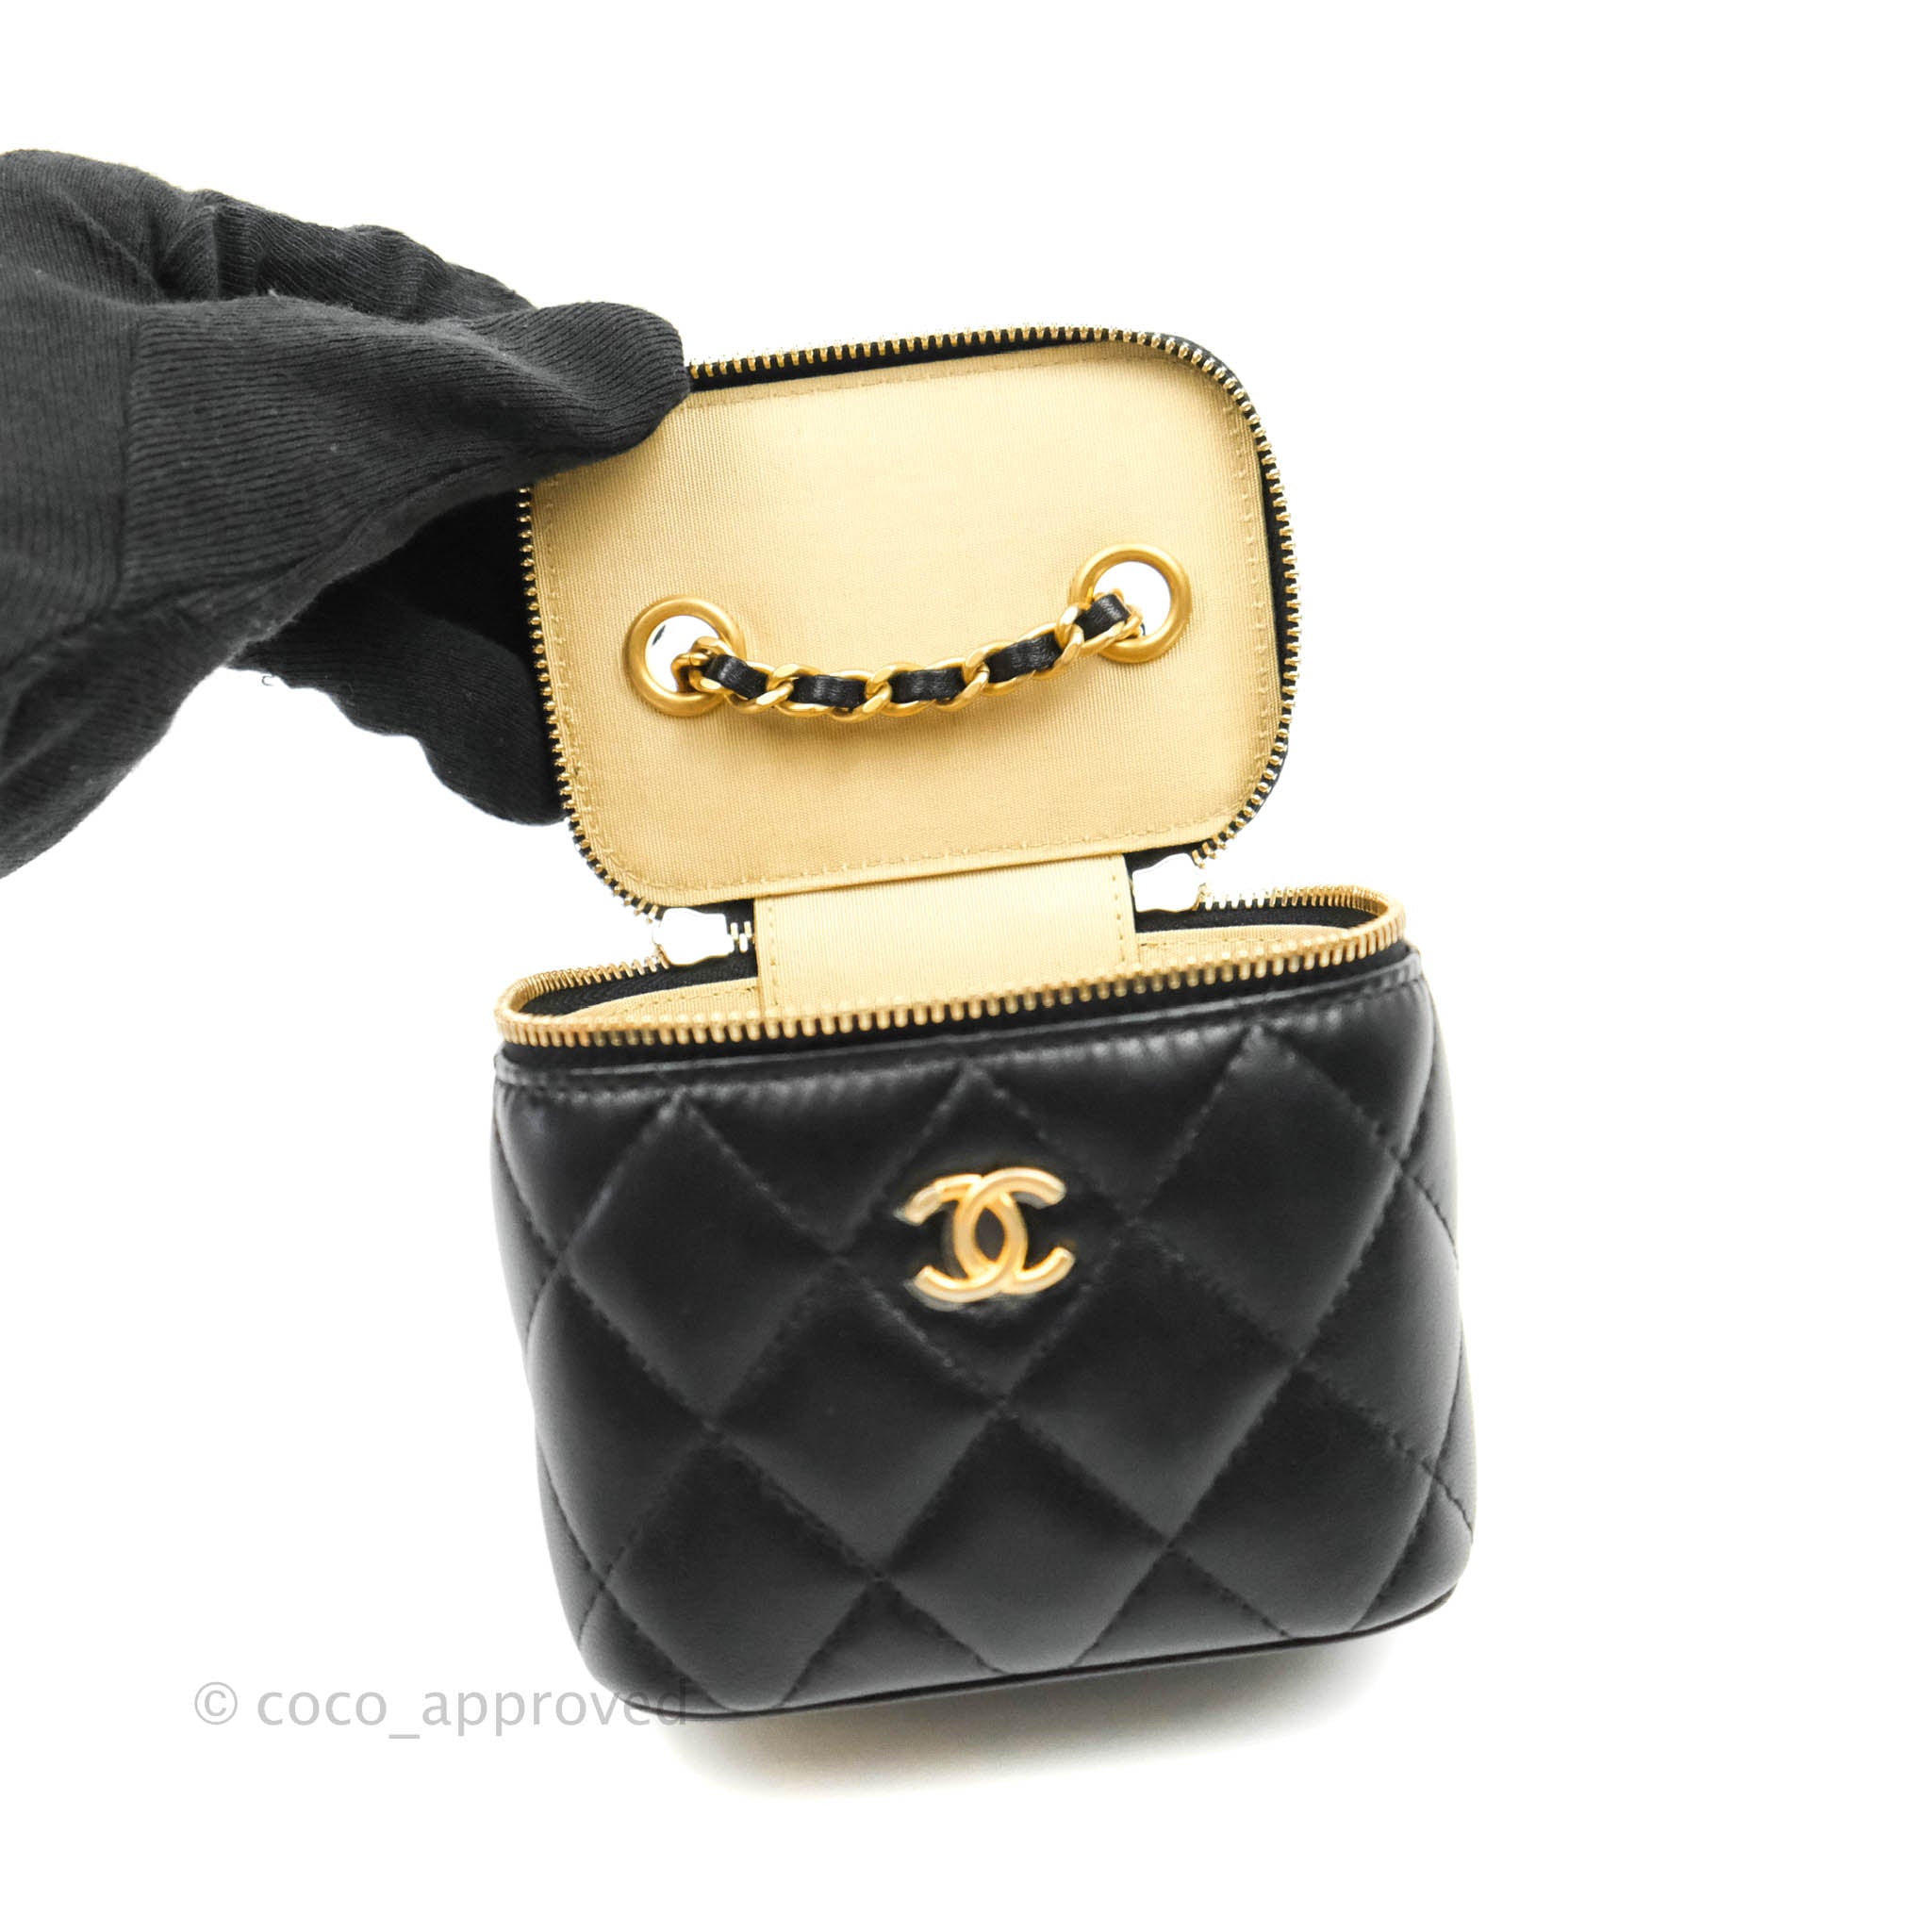 Sold at Auction: Chanel VIP Hair Clip